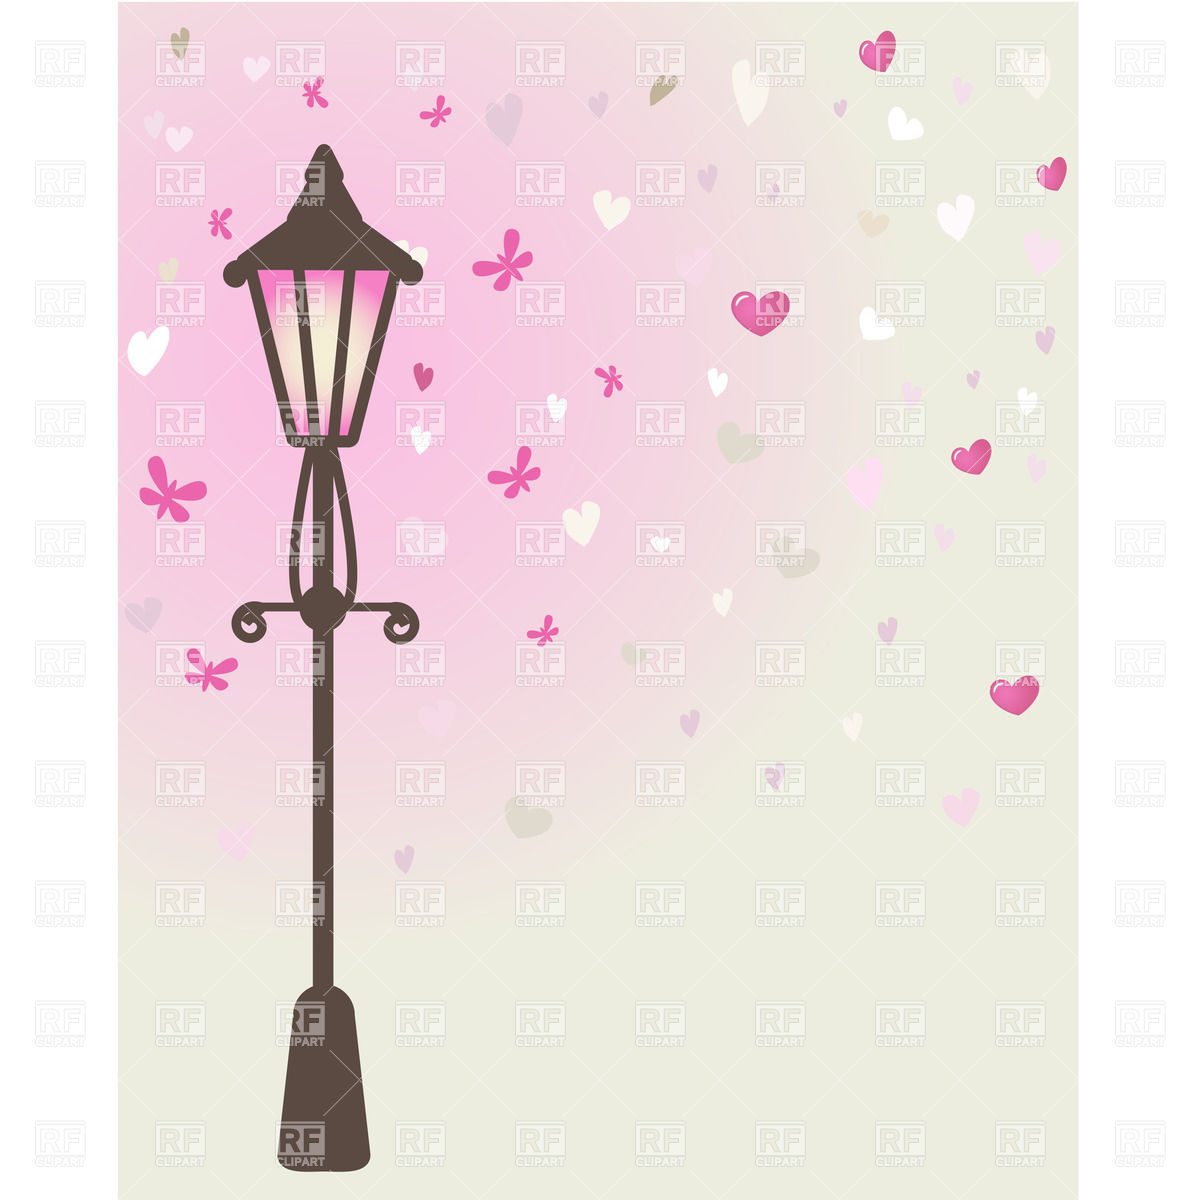 Vintage Street Lamp On Romantic Pink Background With Hearts 23889    